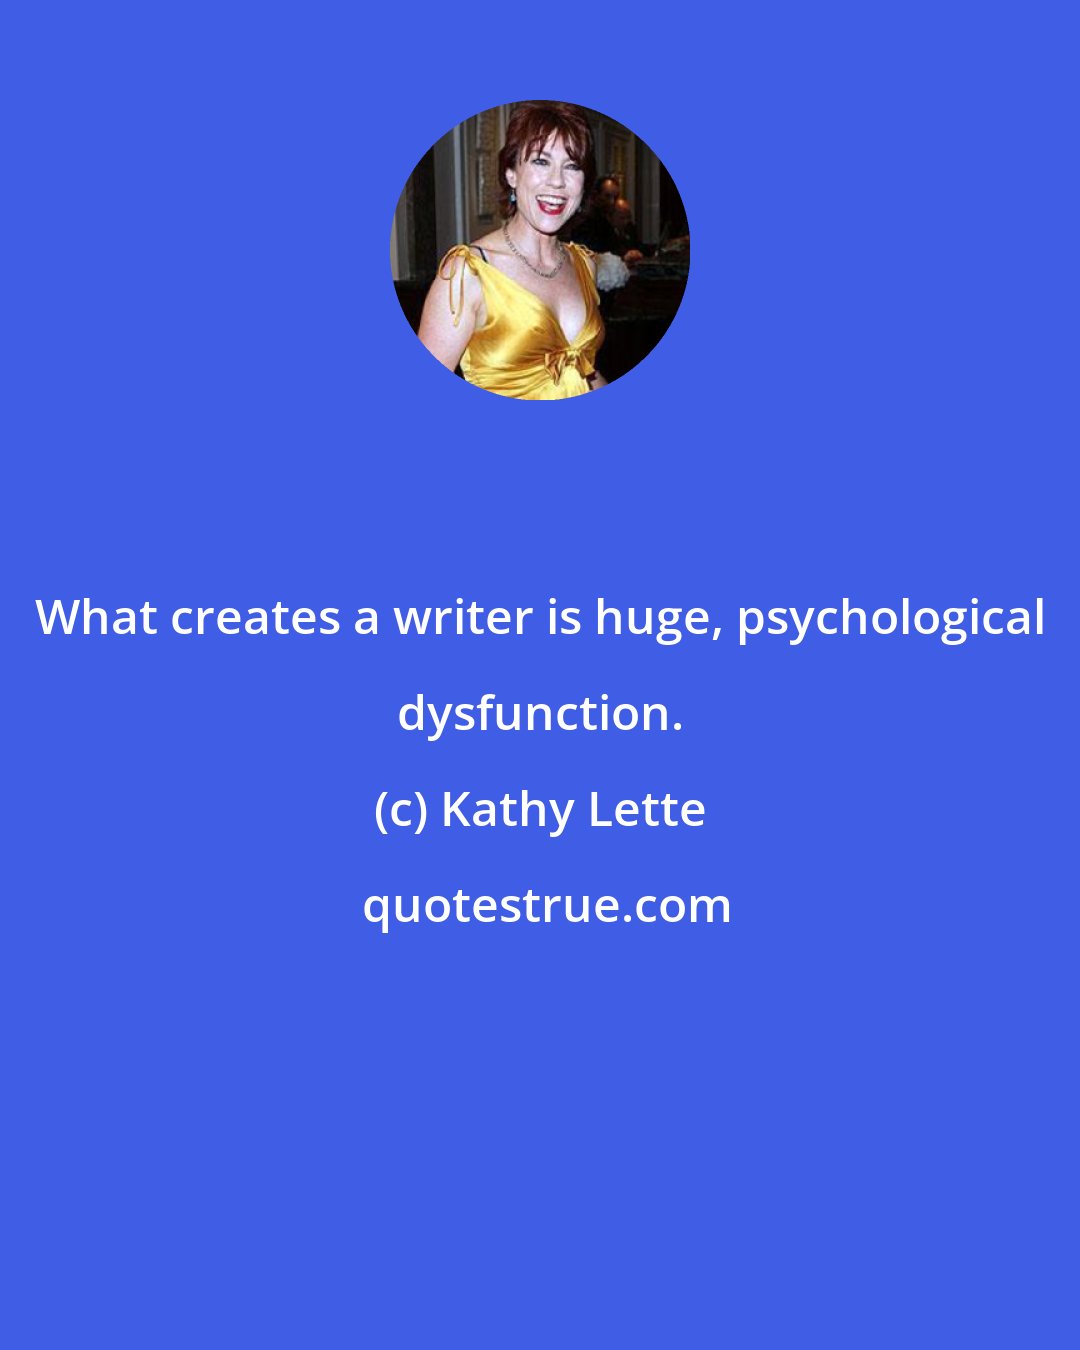 Kathy Lette: What creates a writer is huge, psychological dysfunction.